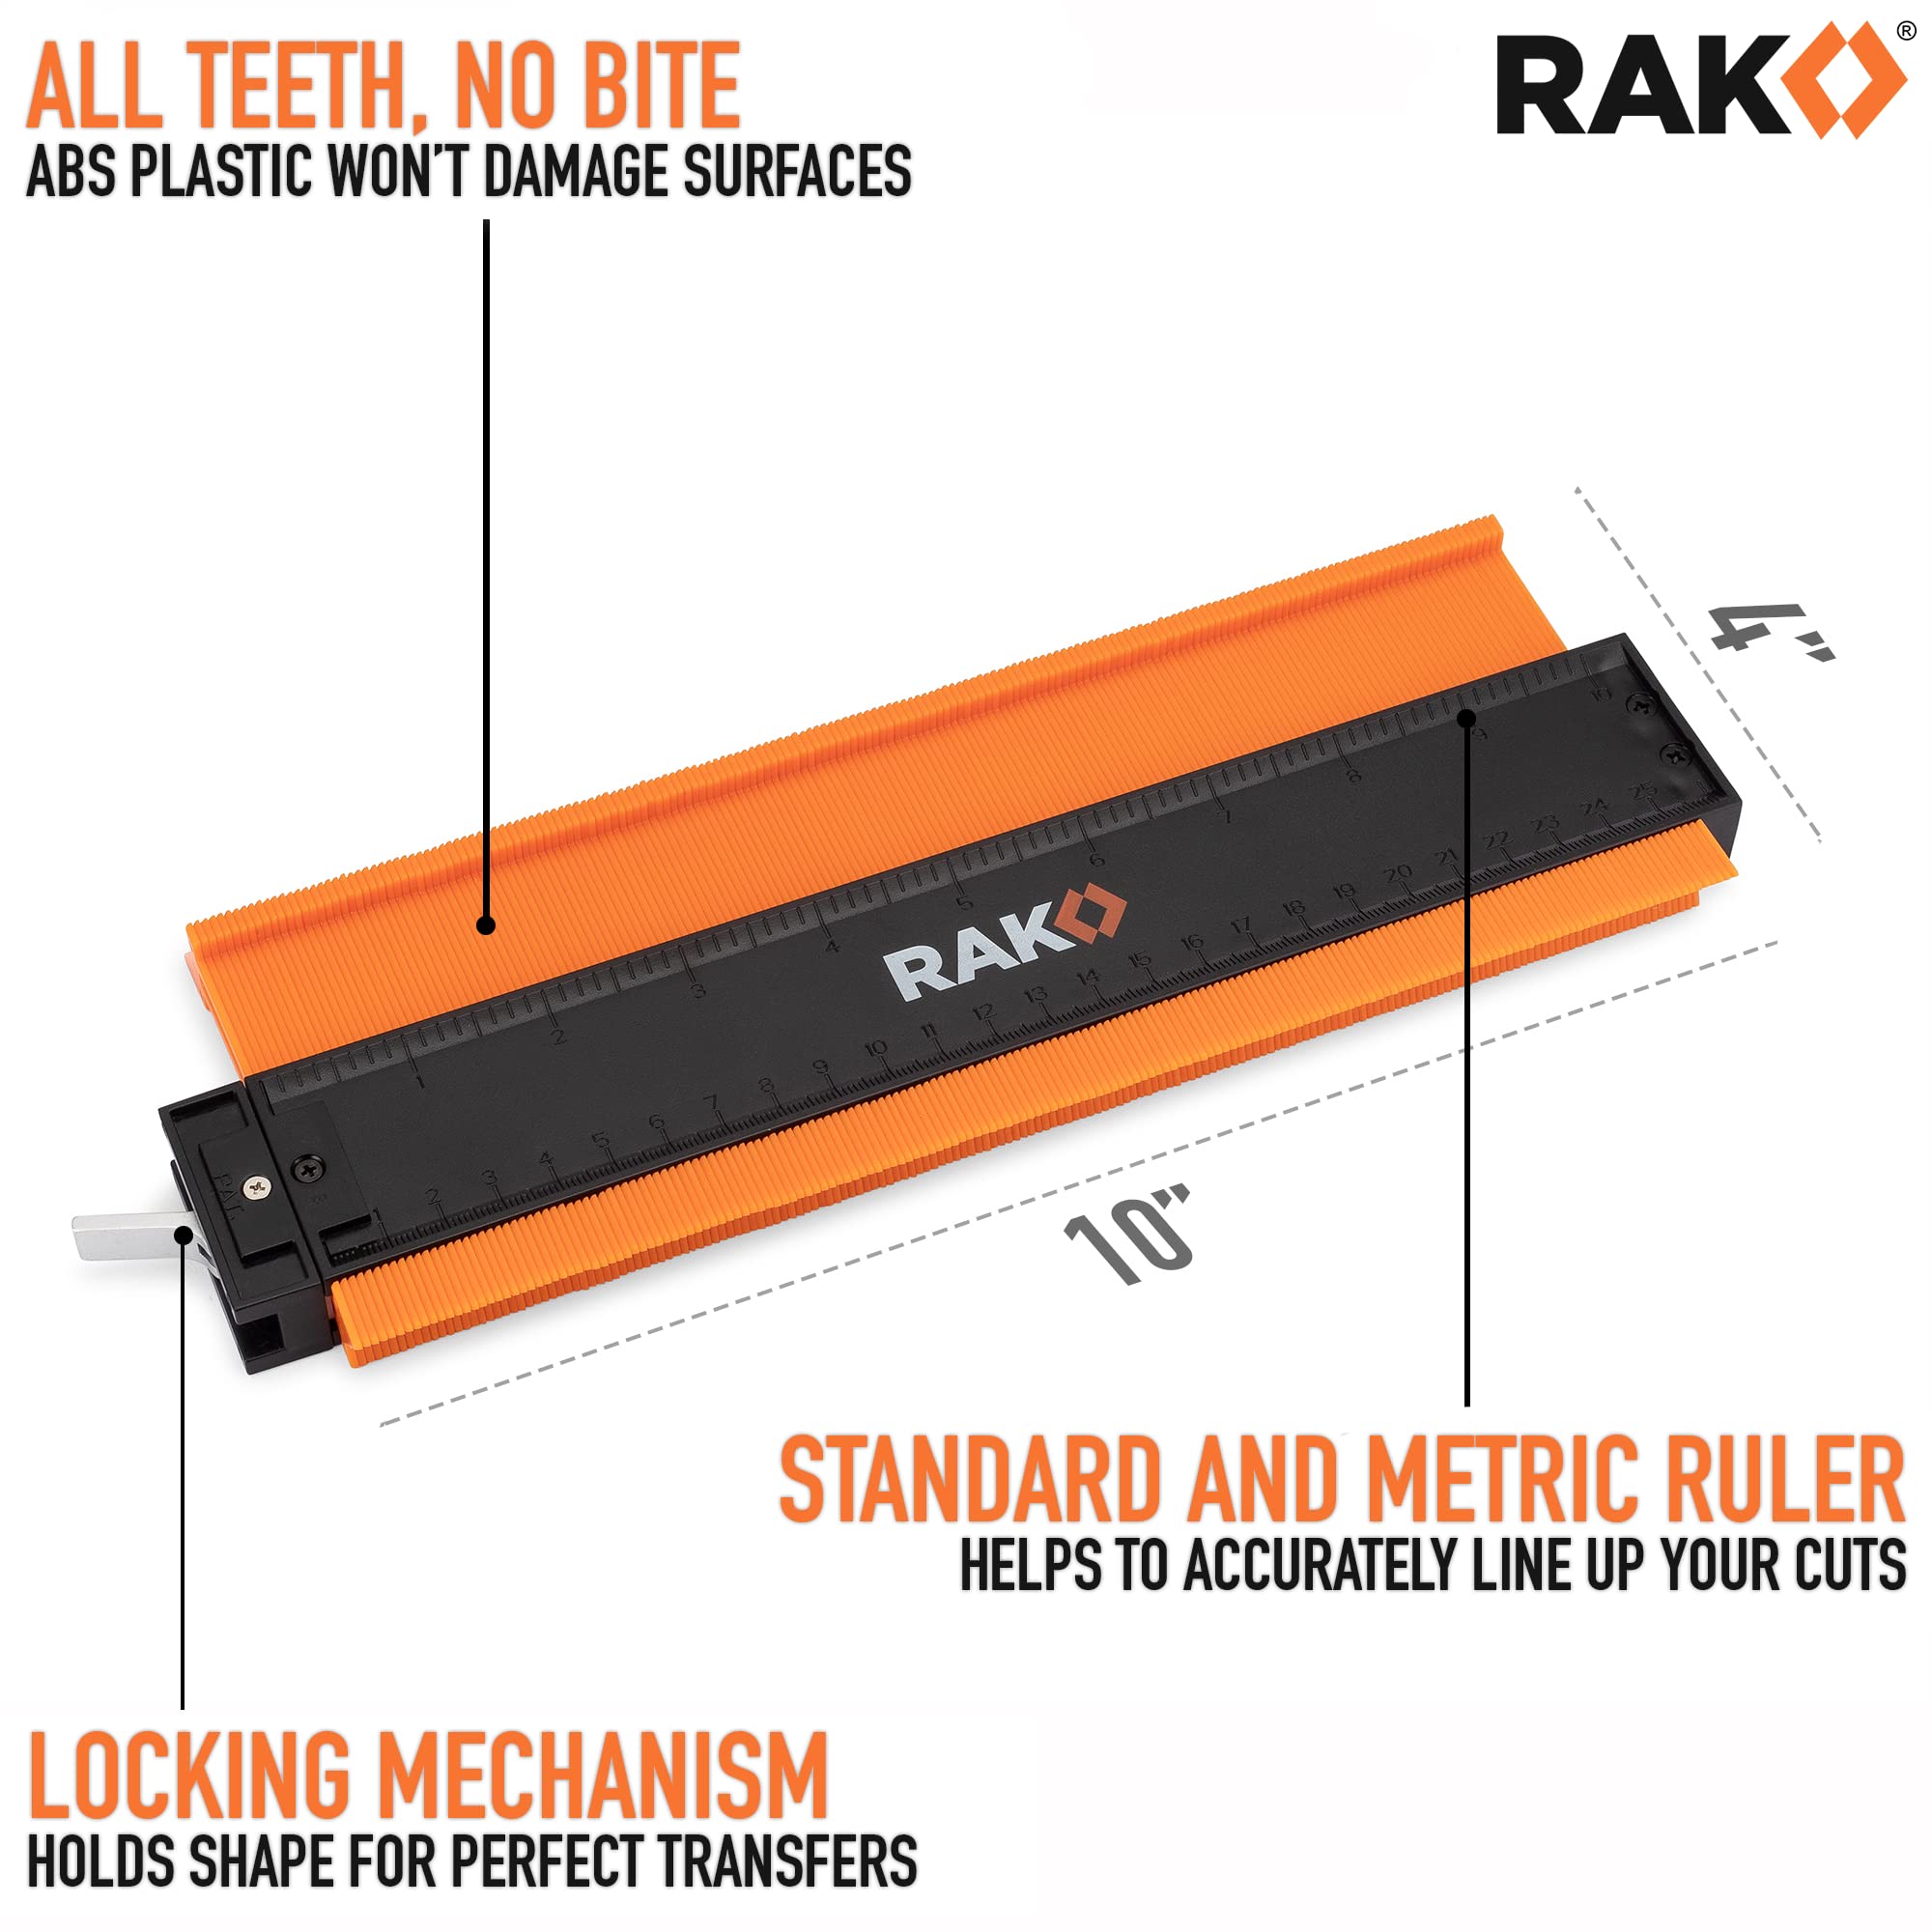 RAK Contour Gauge - Christmas Gifts for Dad - 10 Inch Edge Profile Measuring Tool with Lock - Adjustable Irregular Shape Outline of Flooring, Laying Tile, Woodwork, Construction - Stocking Stuffers